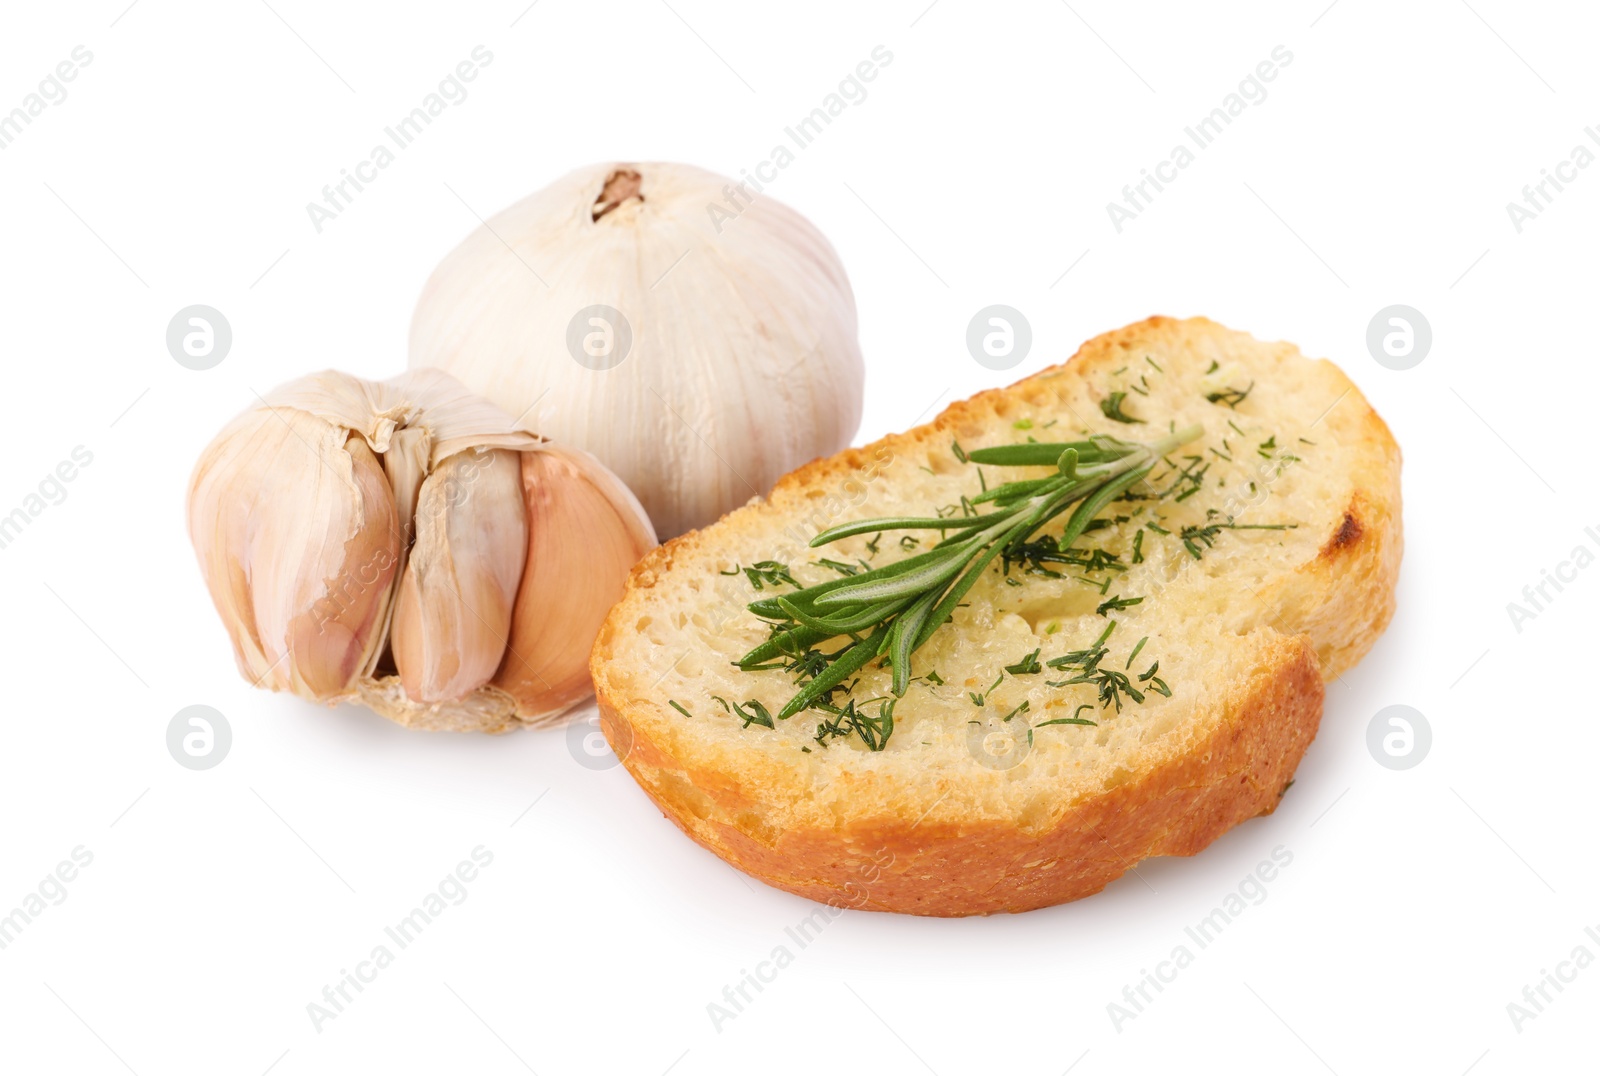 Photo of Piece of tasty baguette with garlic, rosemary and dill isolated on white